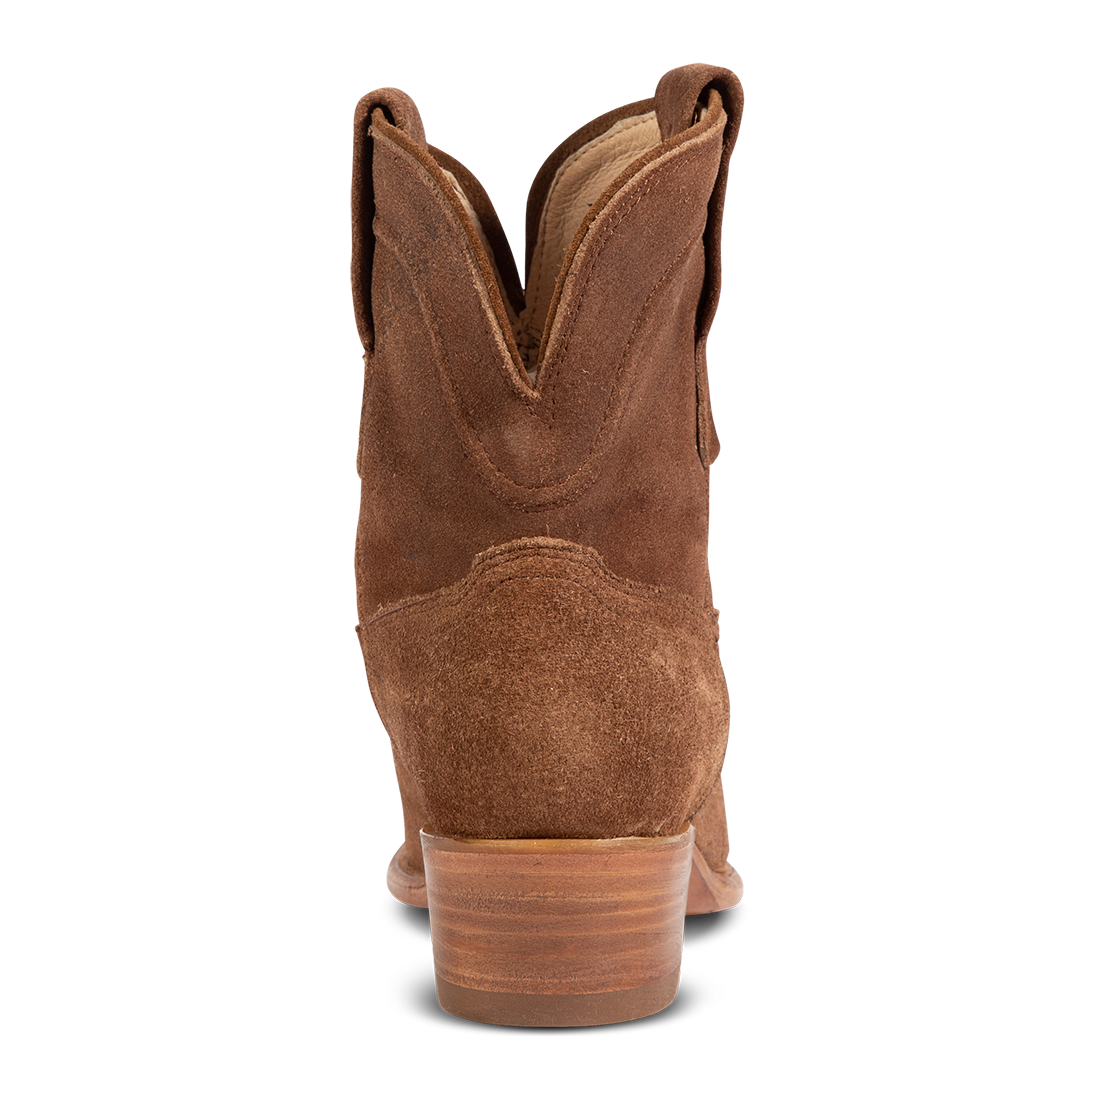 Back view showing back dip and leather heel with scallop stitch detailing on FREEBIRD women's Zamora tan suede bootie